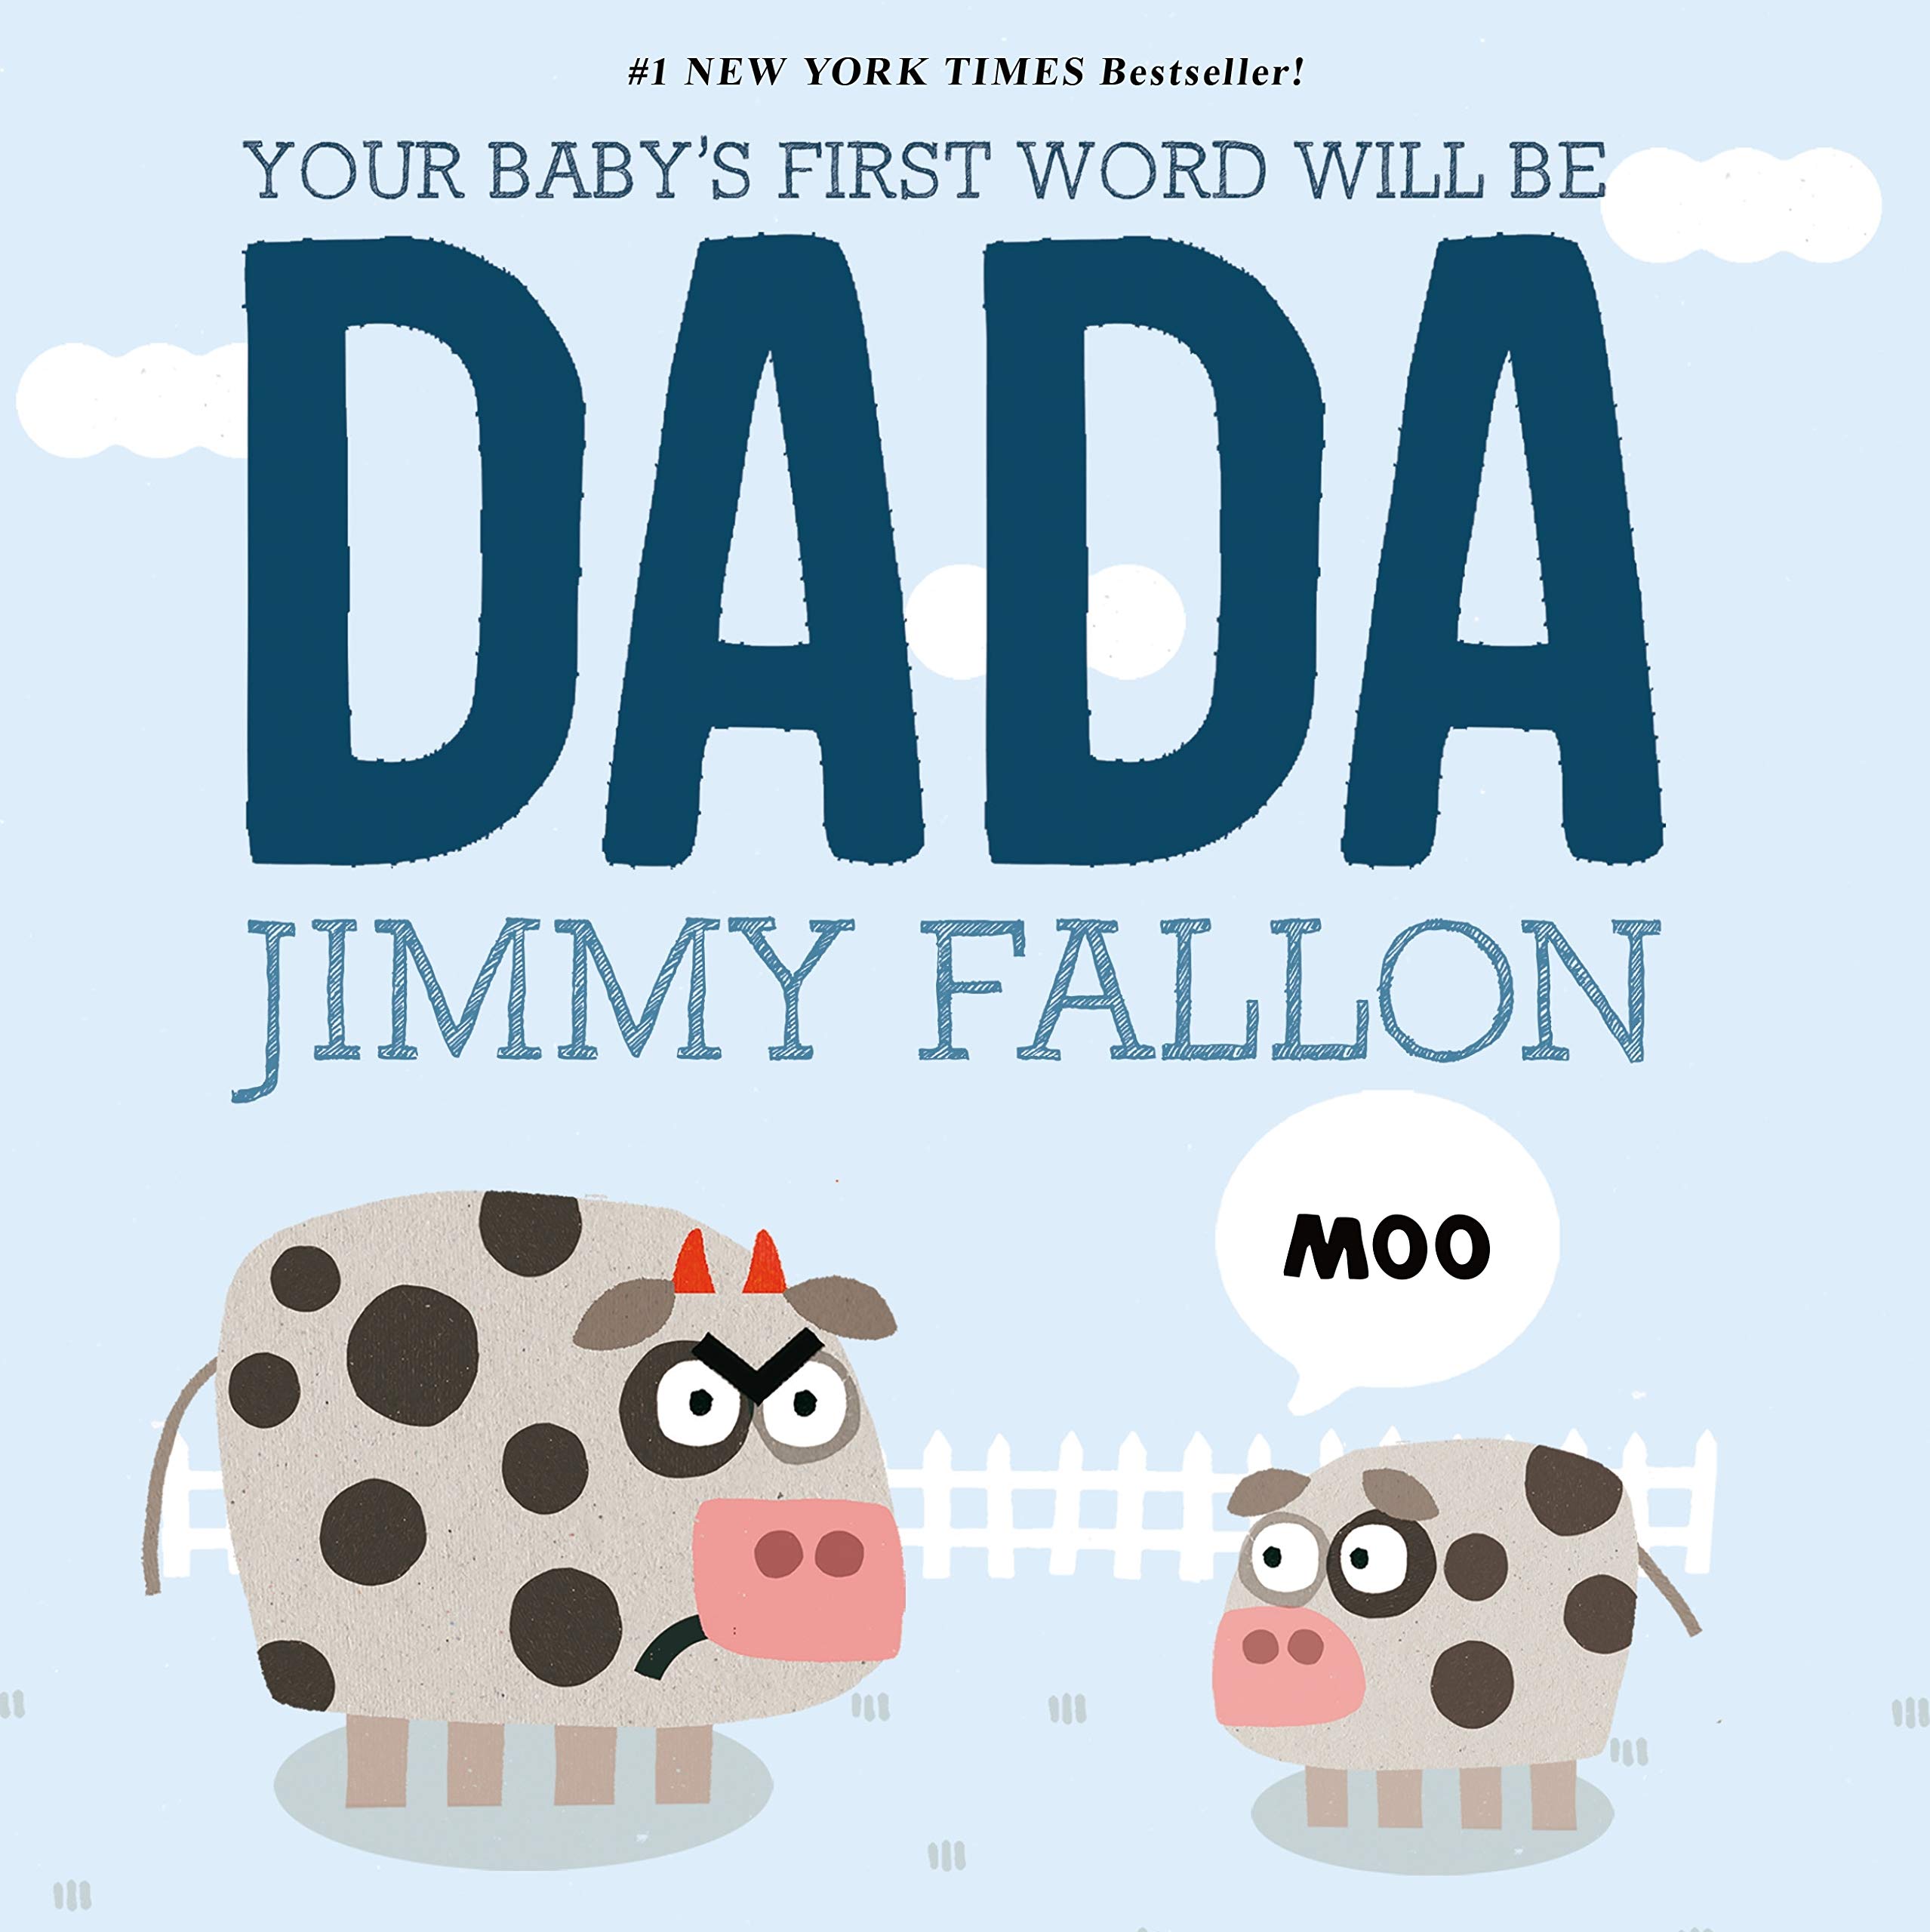 "Your Baby's First Word Will Be DADA" by Jimmy Fallon